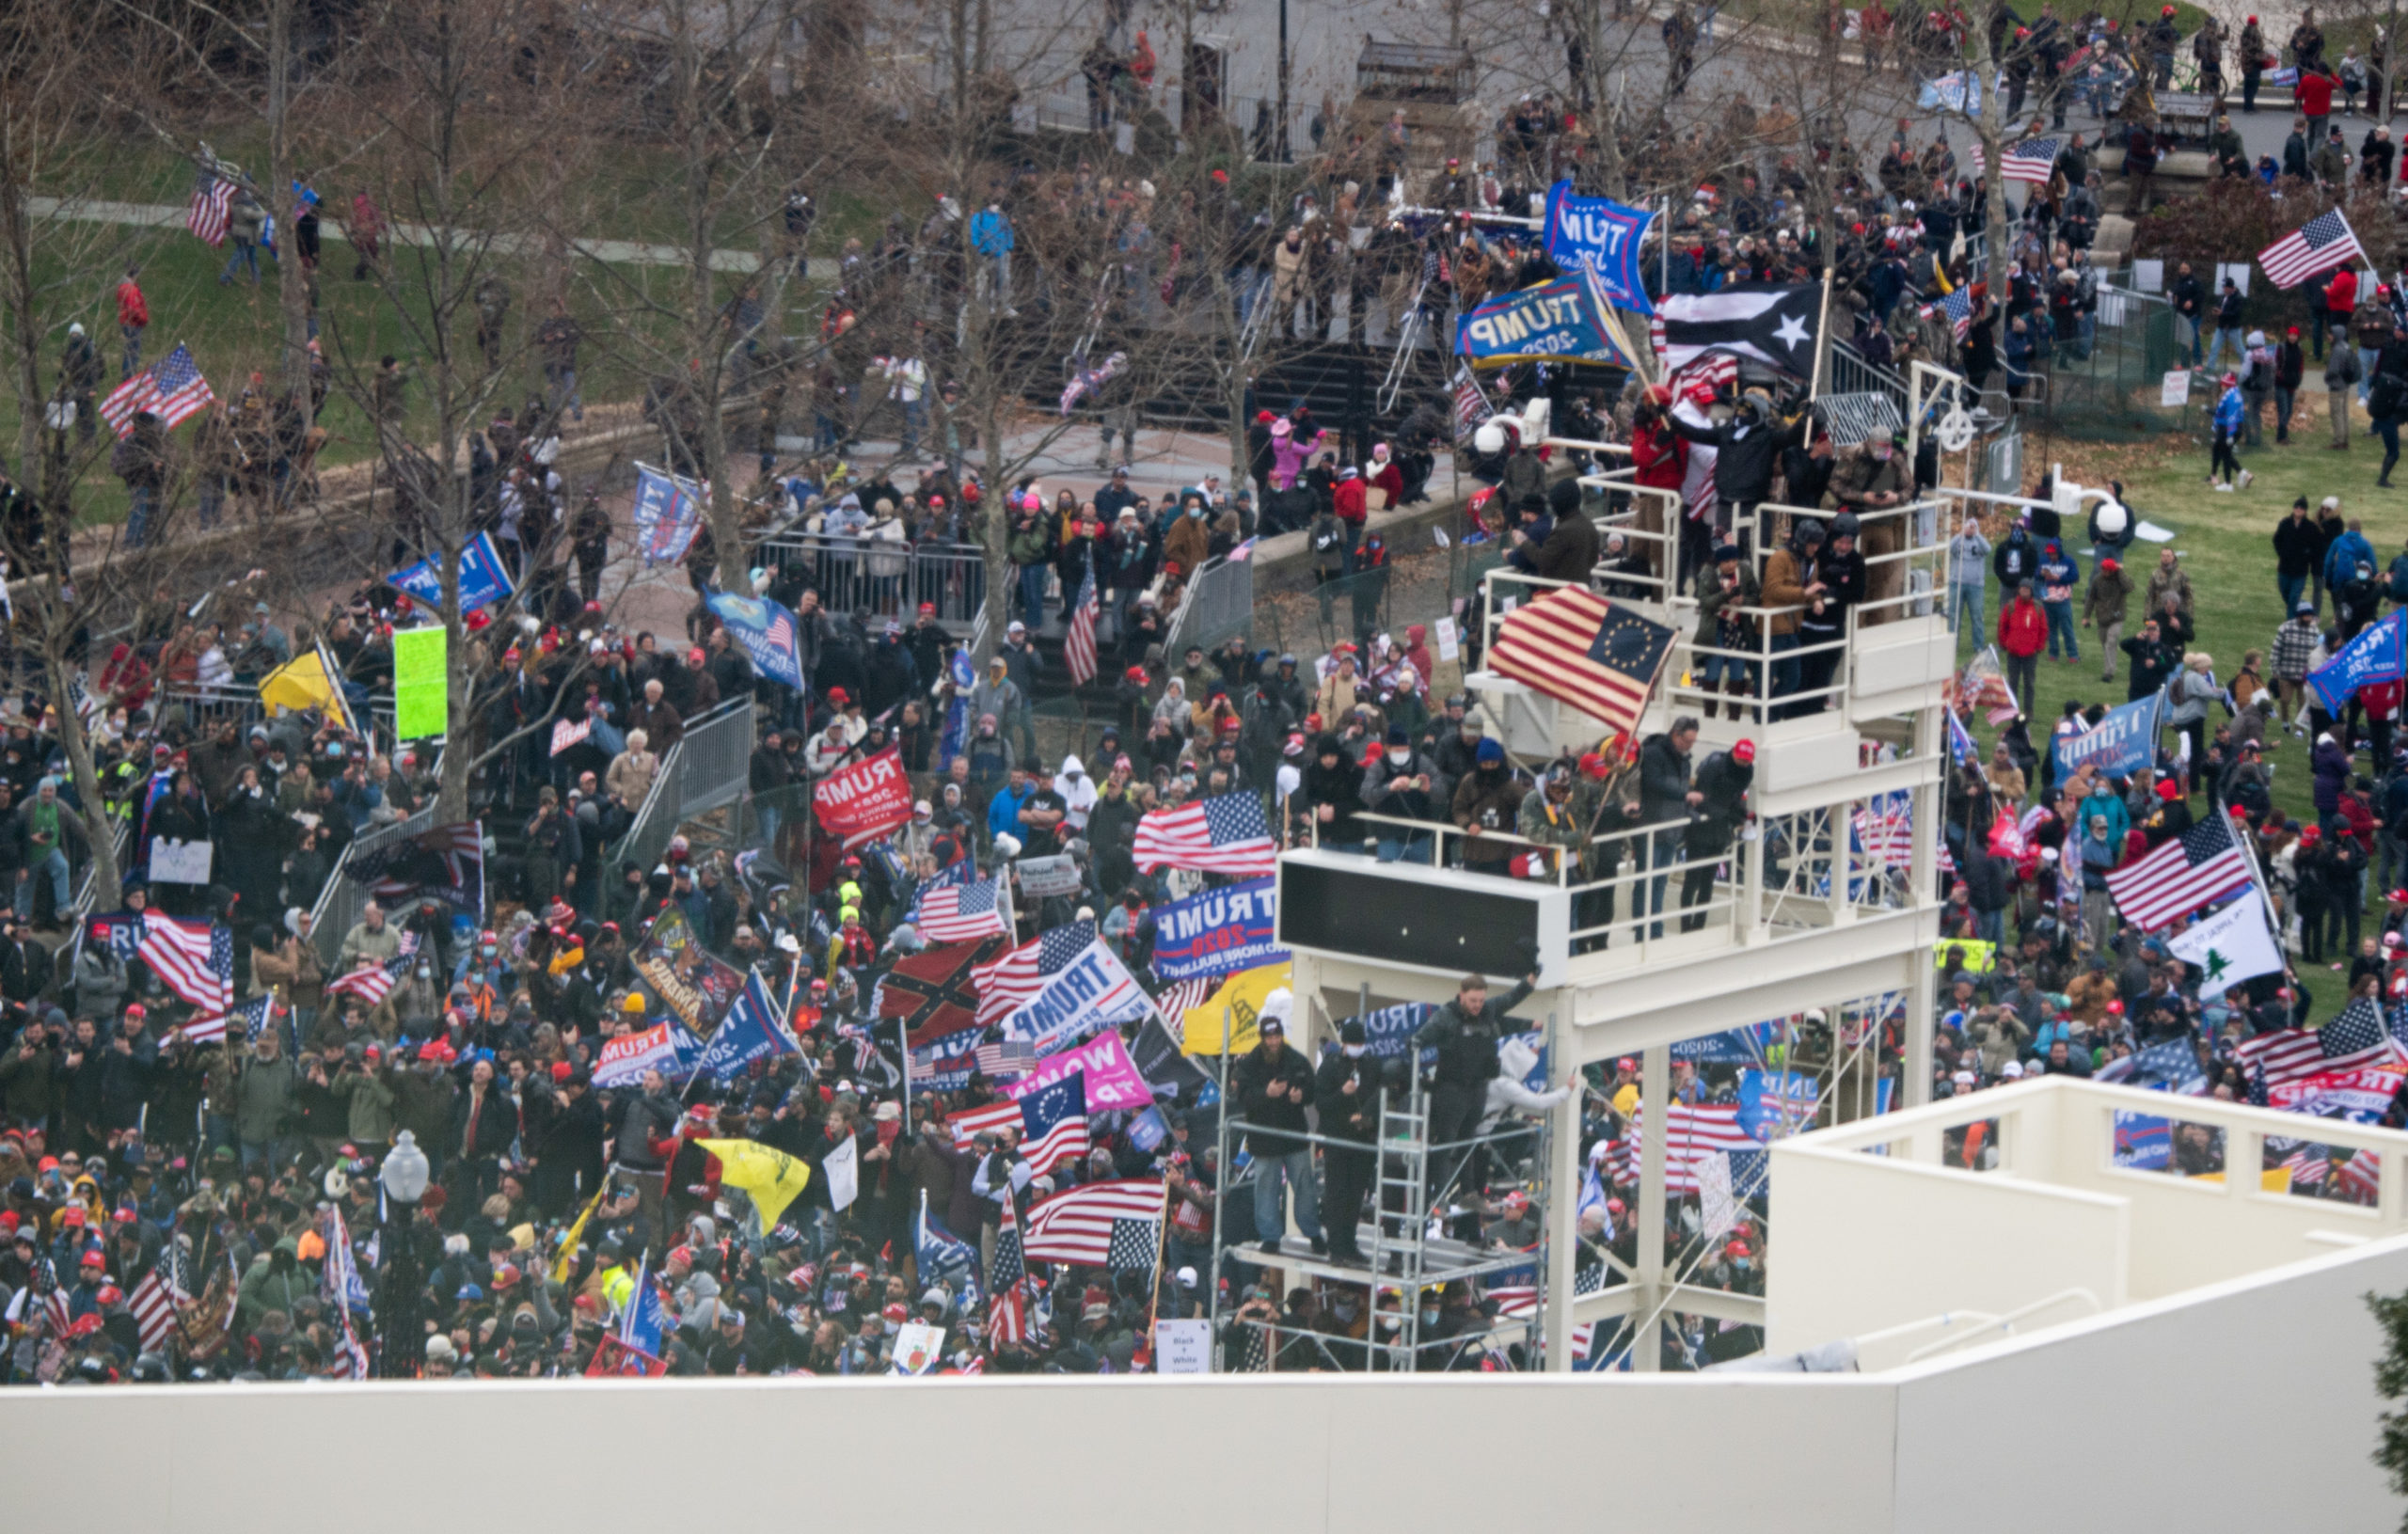 Supporters of US President Donald Trump take over stands set up for the presidential inauguration as they protest at the US Capitol in Washington, DC, January 6, 2021. - Thousands of Trump supporters, fueled by his spurious claims of voter fraud, are flooding the nation's capital protesting the expected certification of Joe Biden's White House victory by the US Congress. SAUL LOEB/AFP via Getty Images